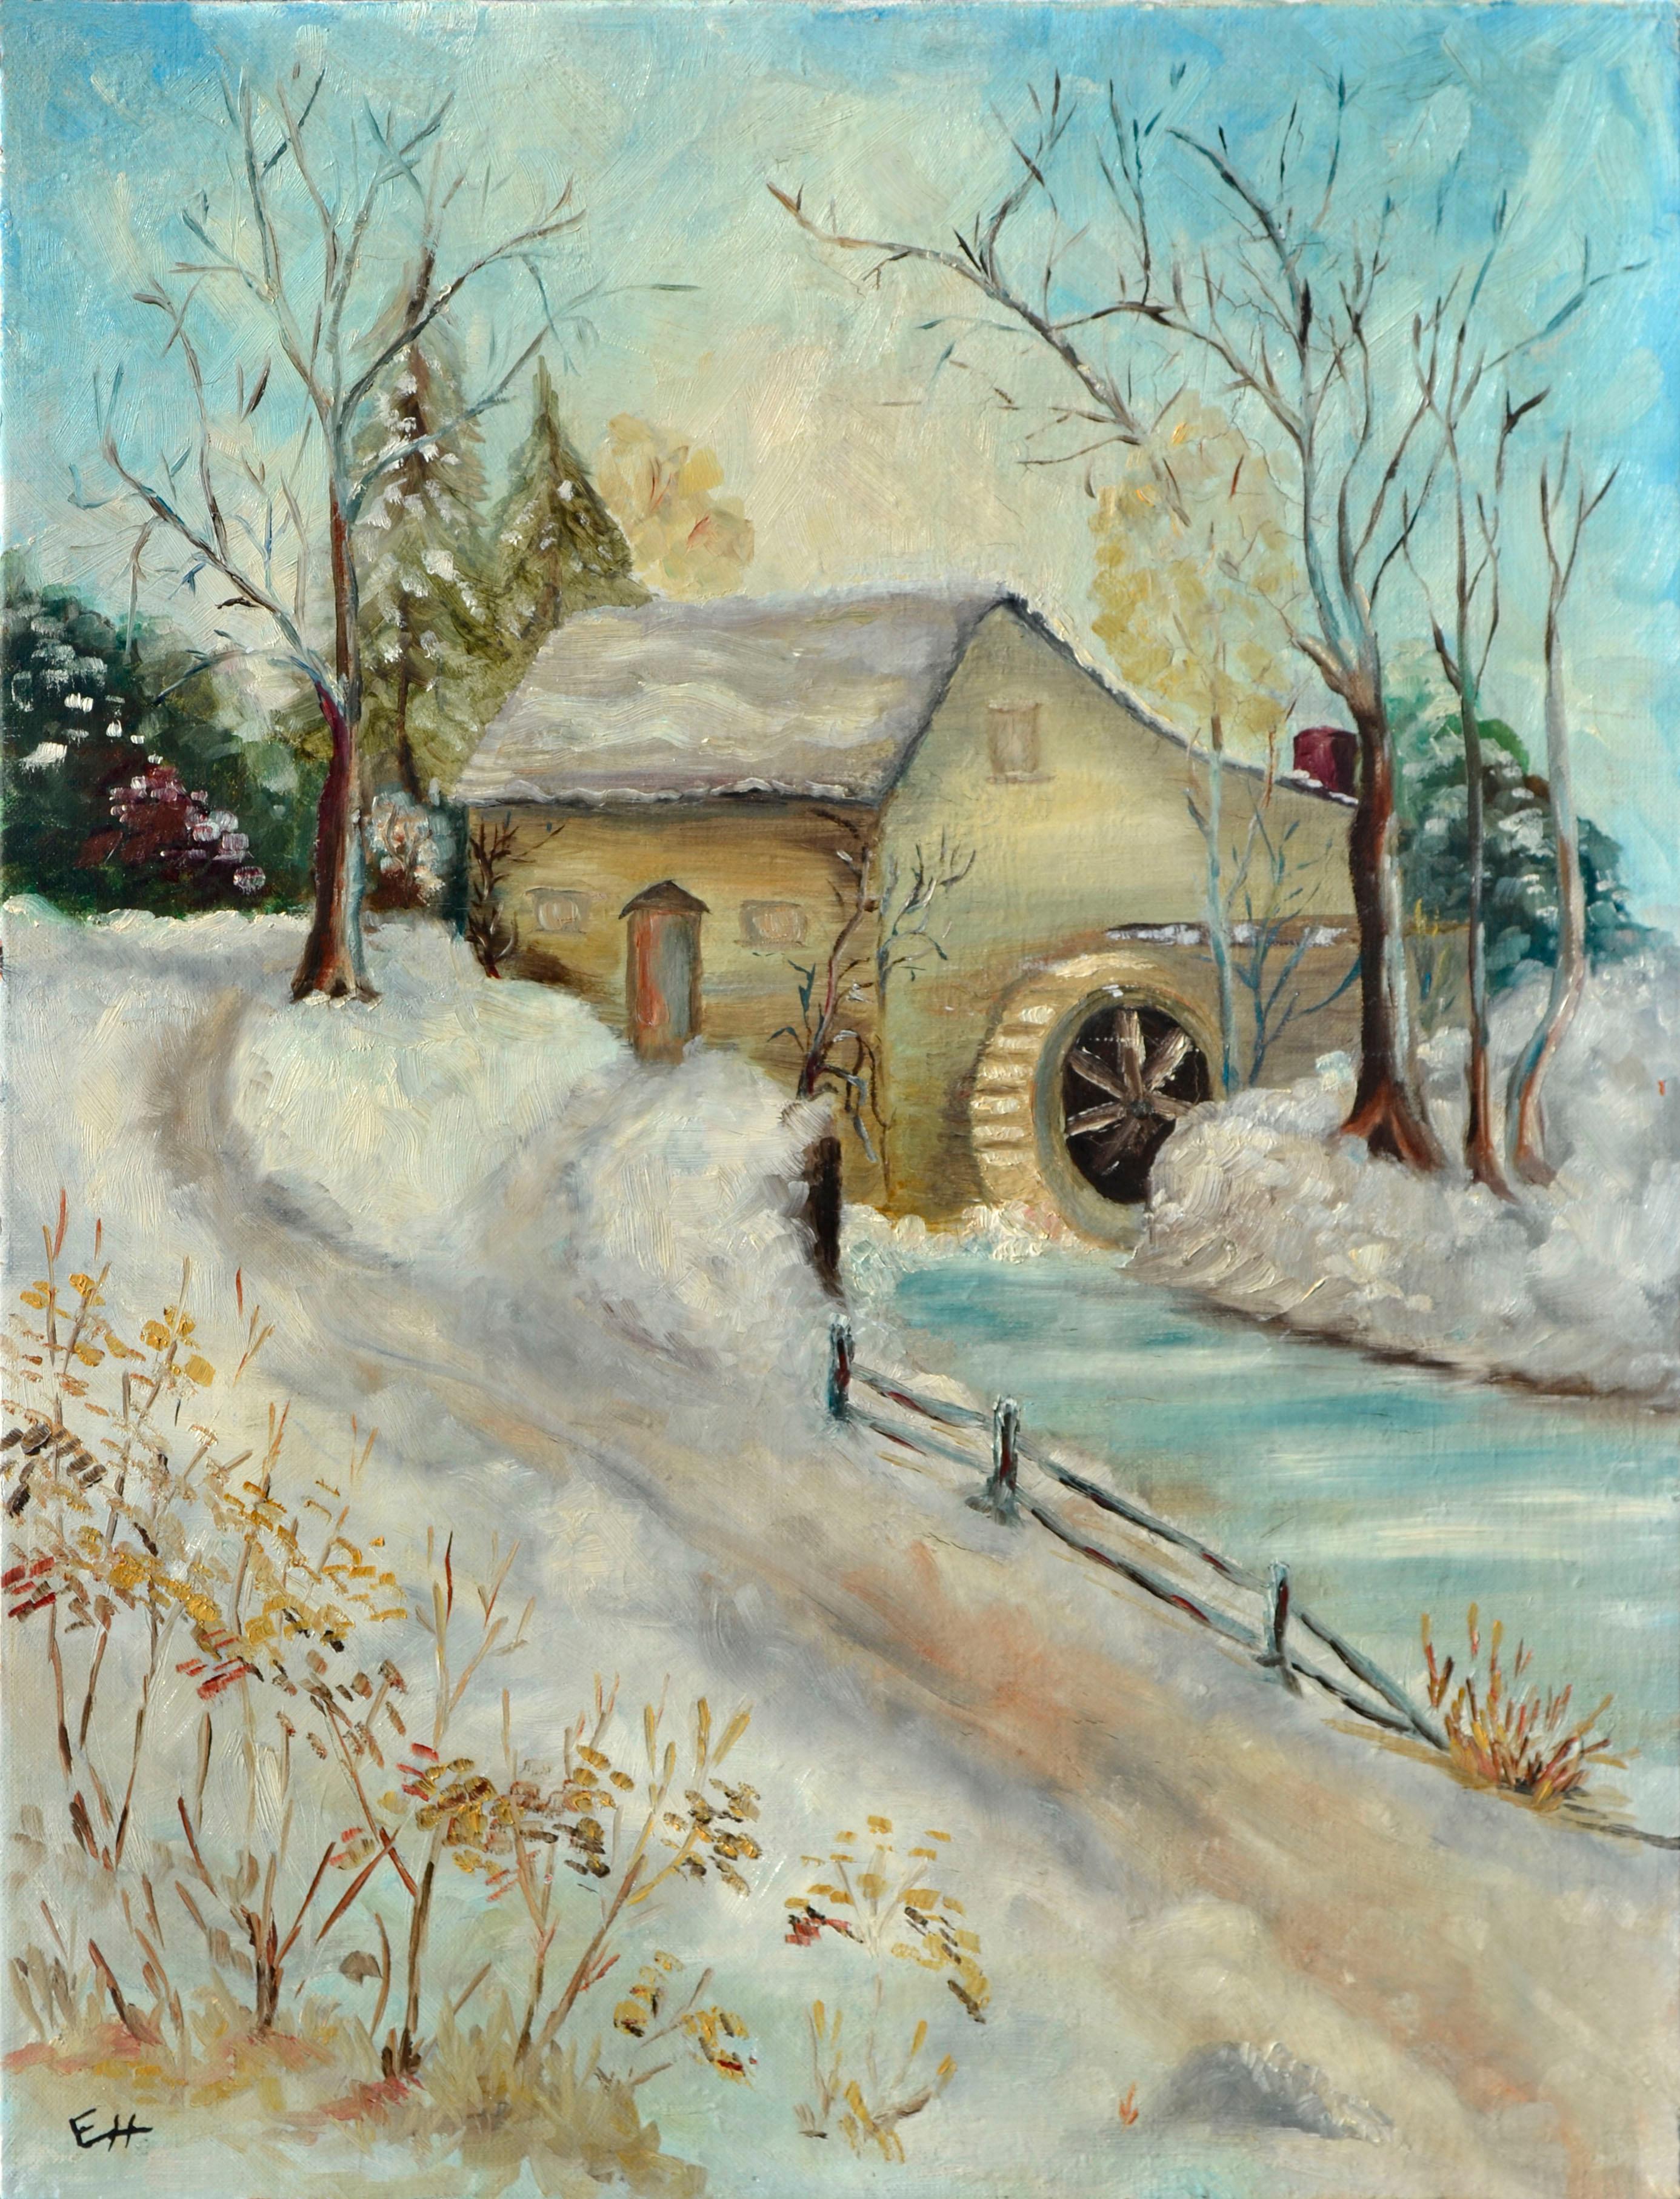 E. Harrison Landscape Painting - Snow Scene with Old Mill - Early 20th Century Winter Landscape